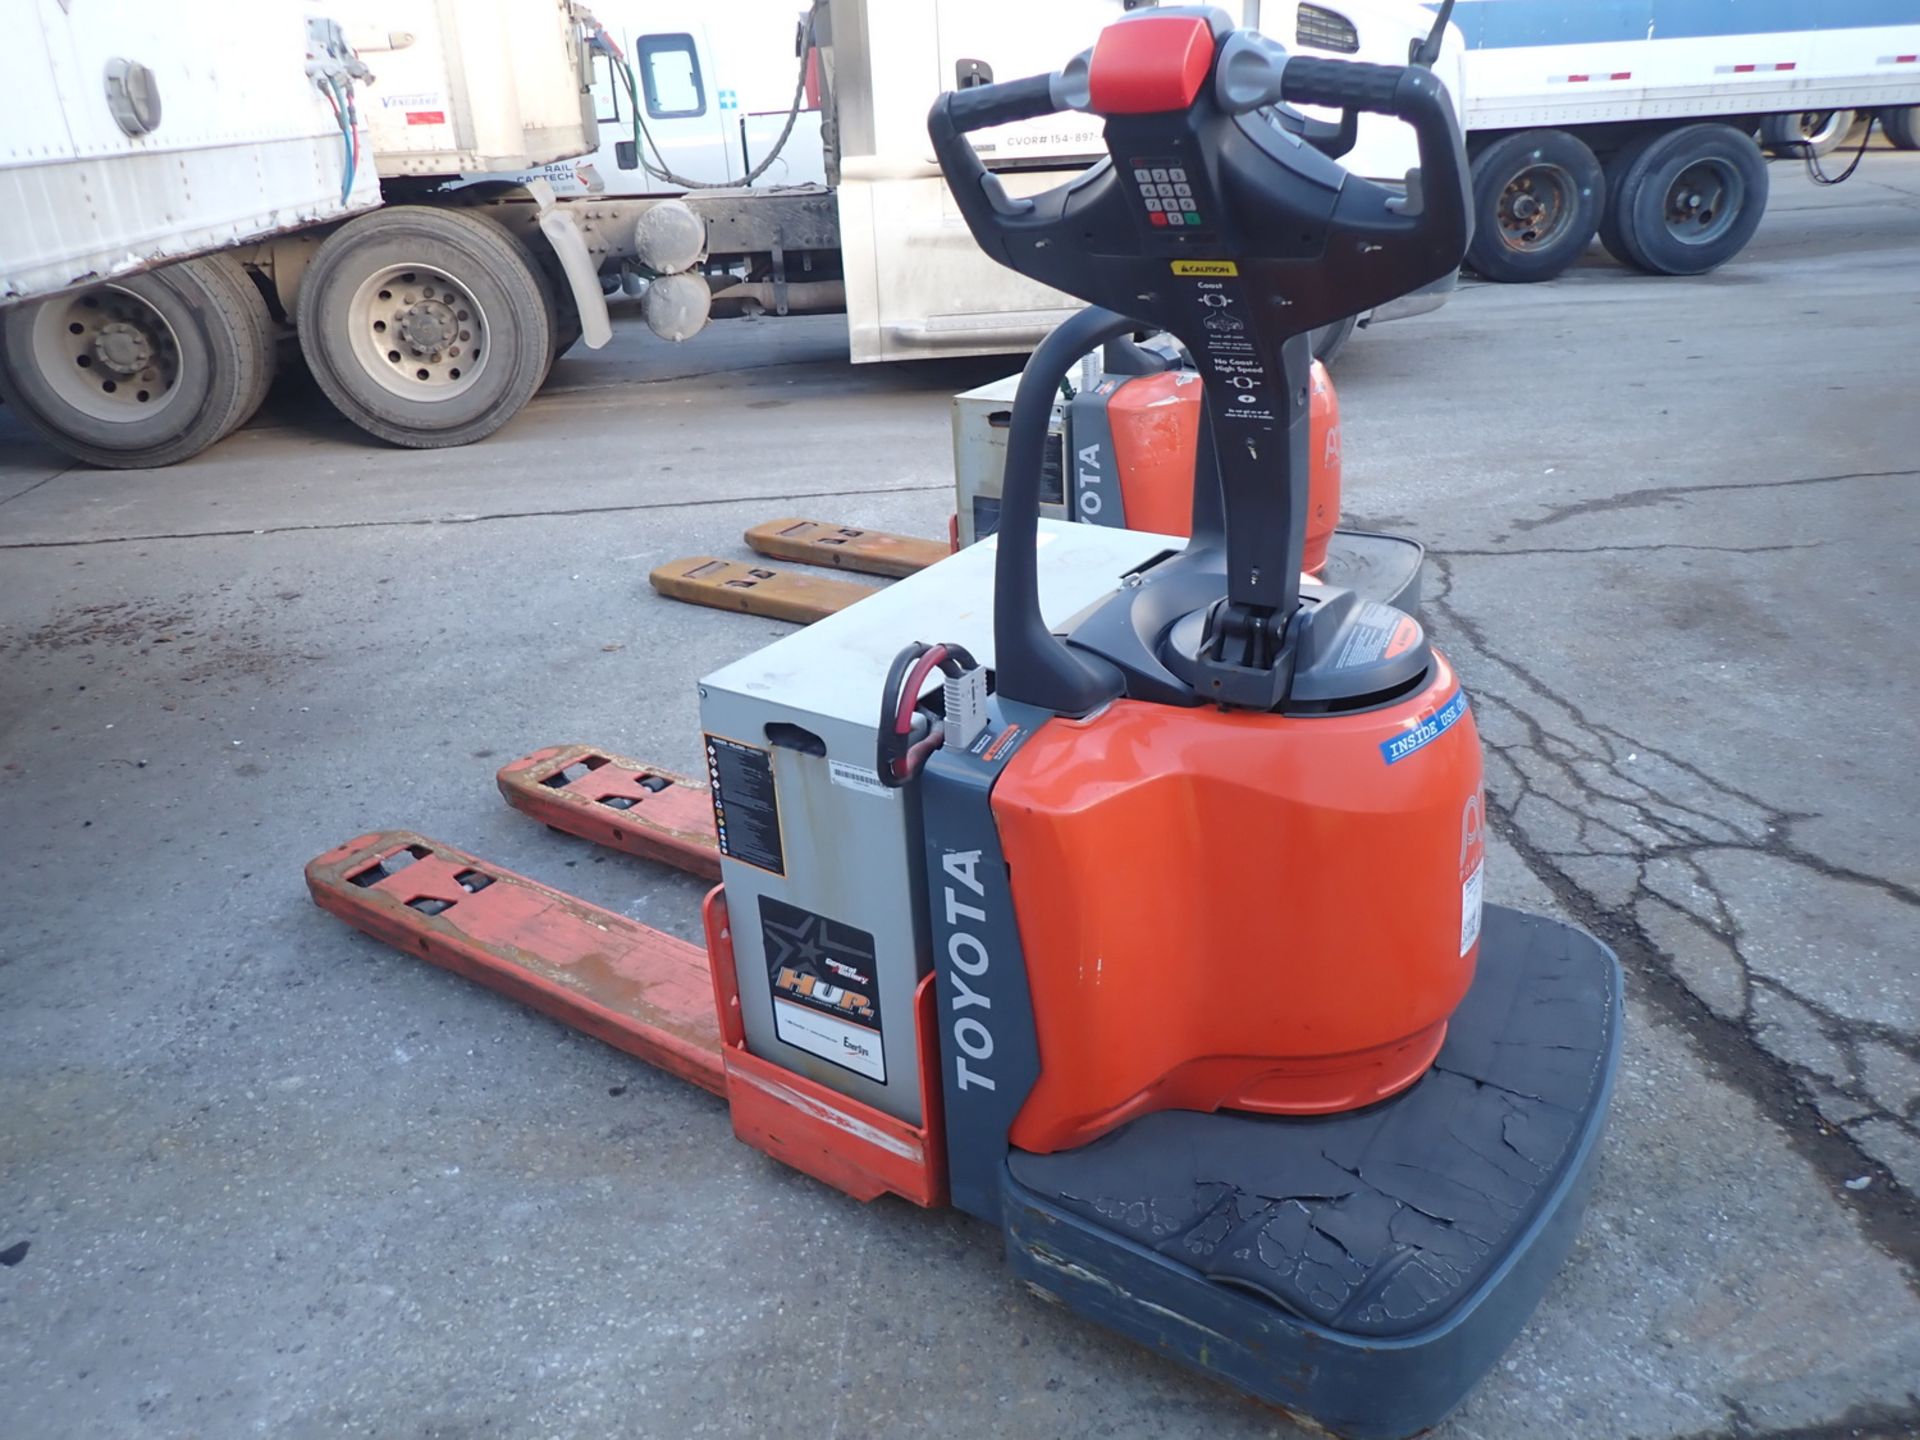 TOYOTA 8HBE30 6,000LBS CAP ELECTRIC RIDE-ON PALLET TRUCK (24V) W/ 4'L FORKS, S/N 51280 (NO CHARGER) - Image 2 of 7